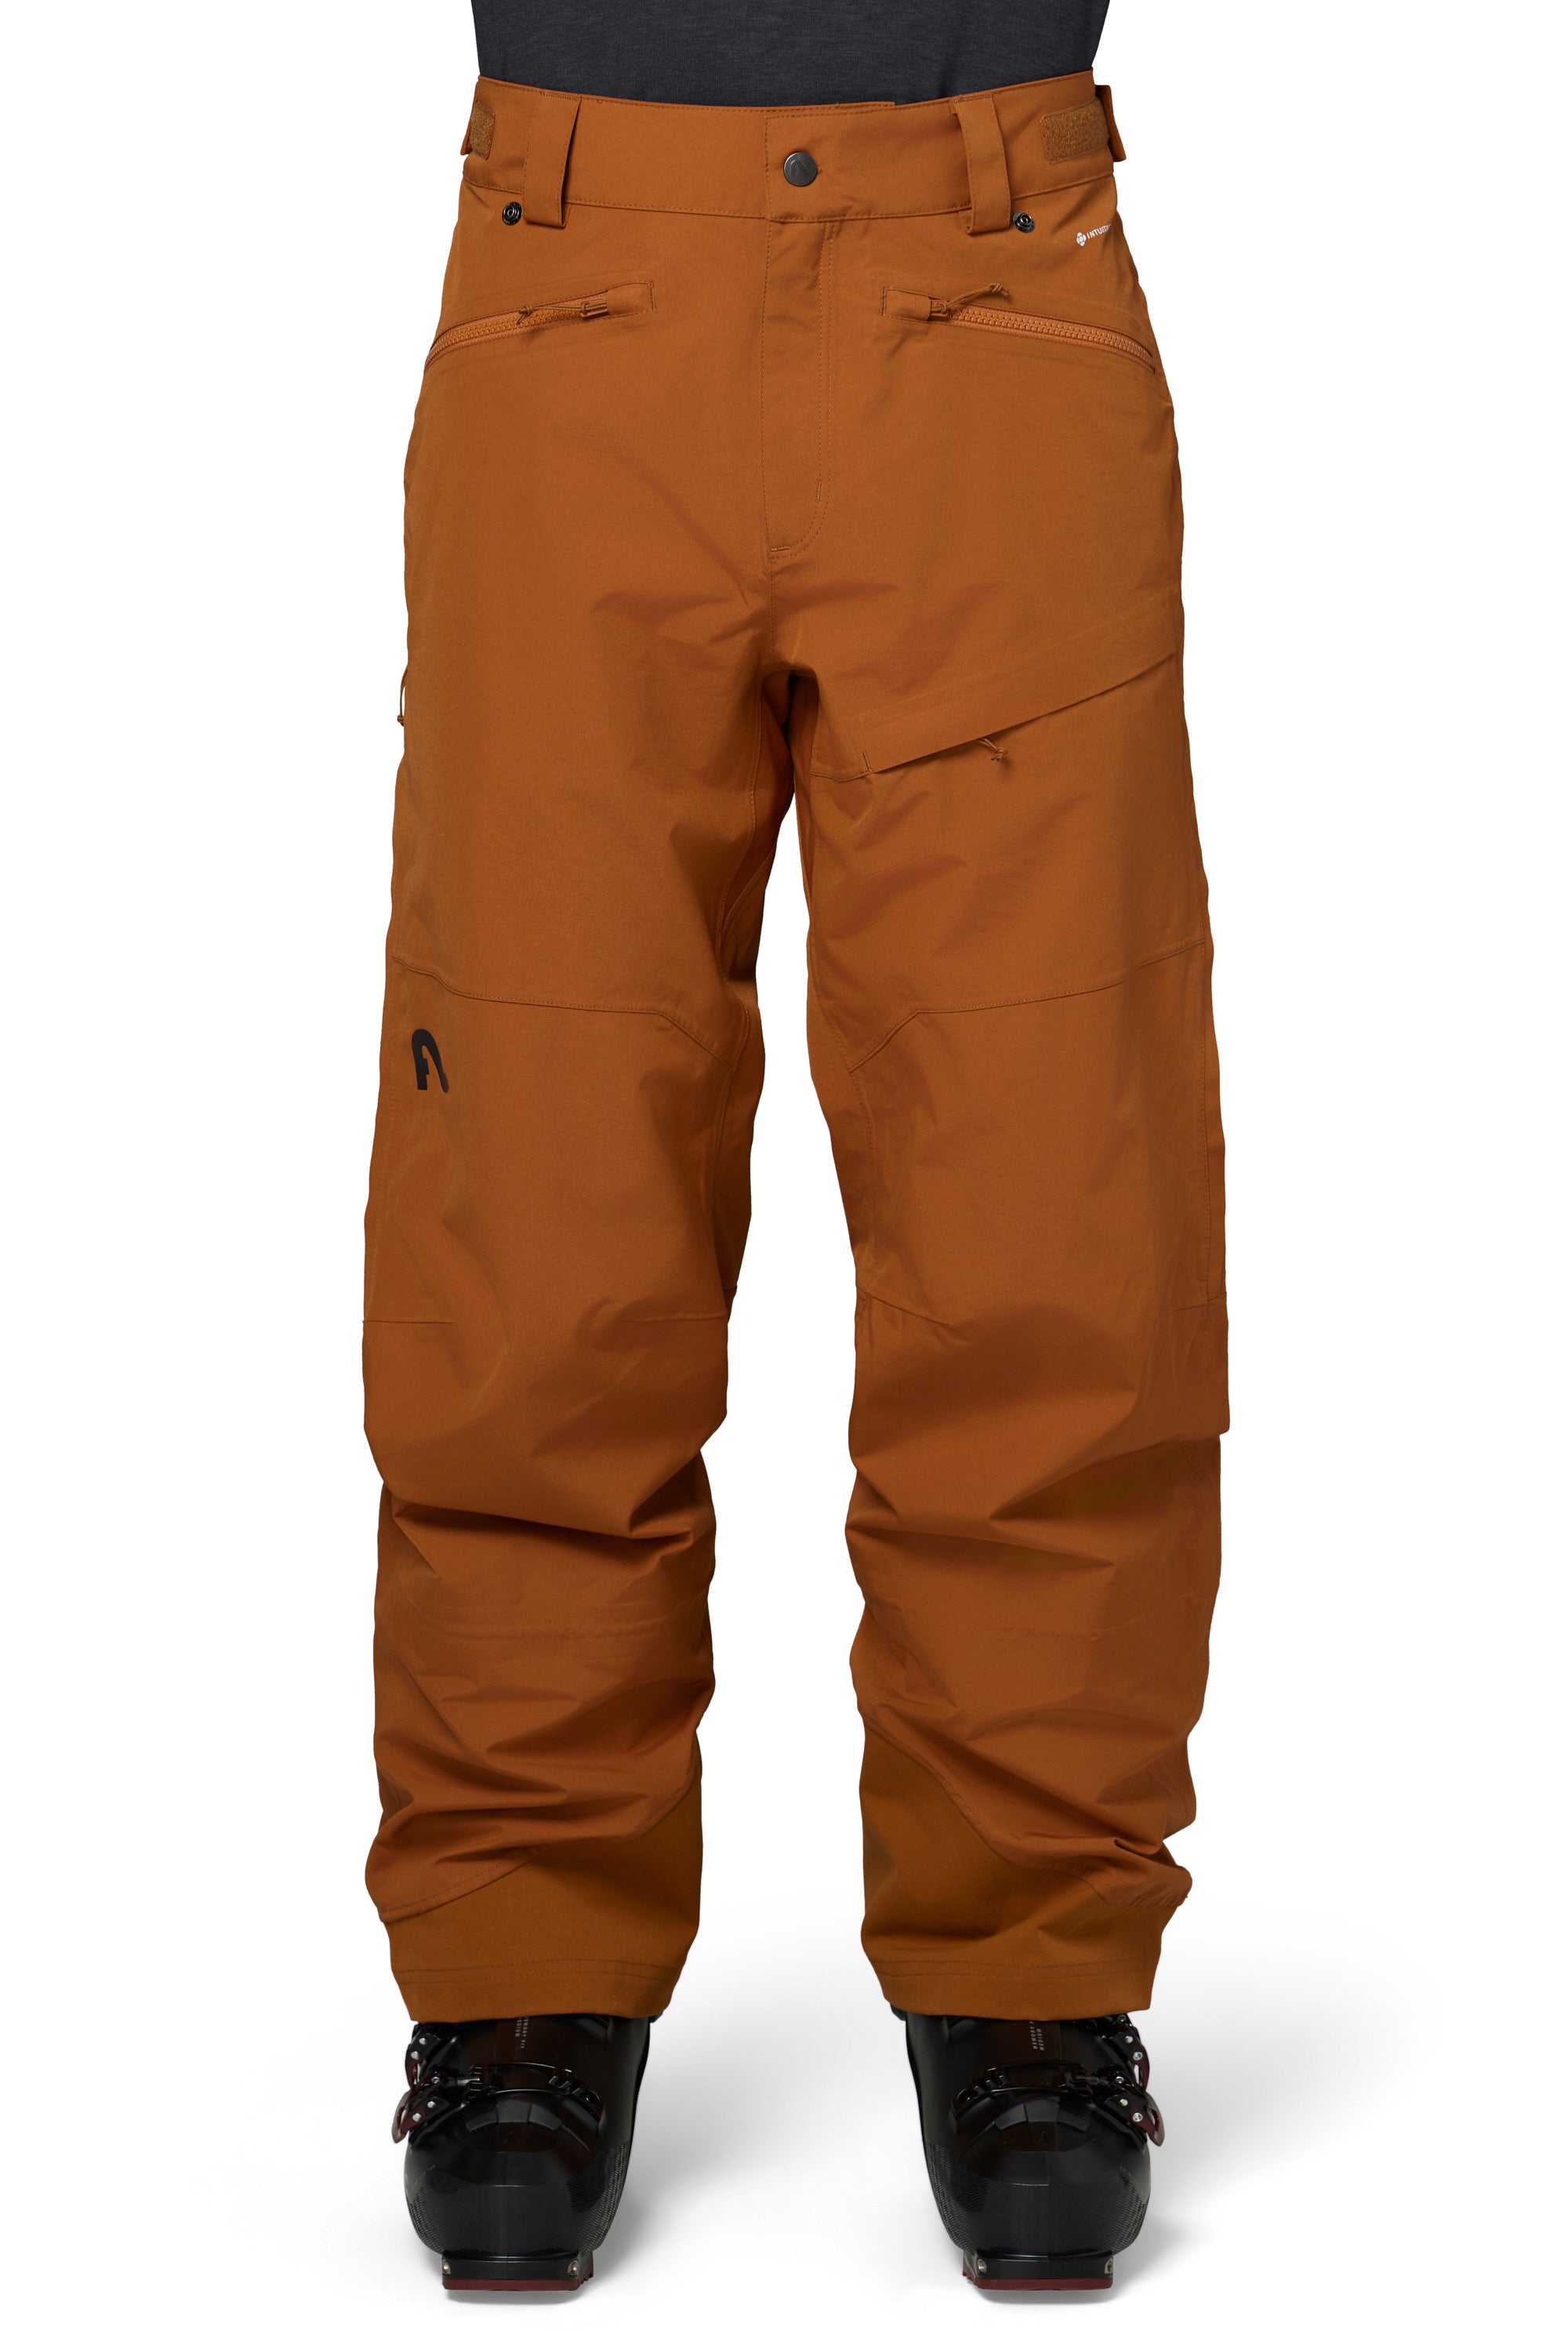 Cage Pant